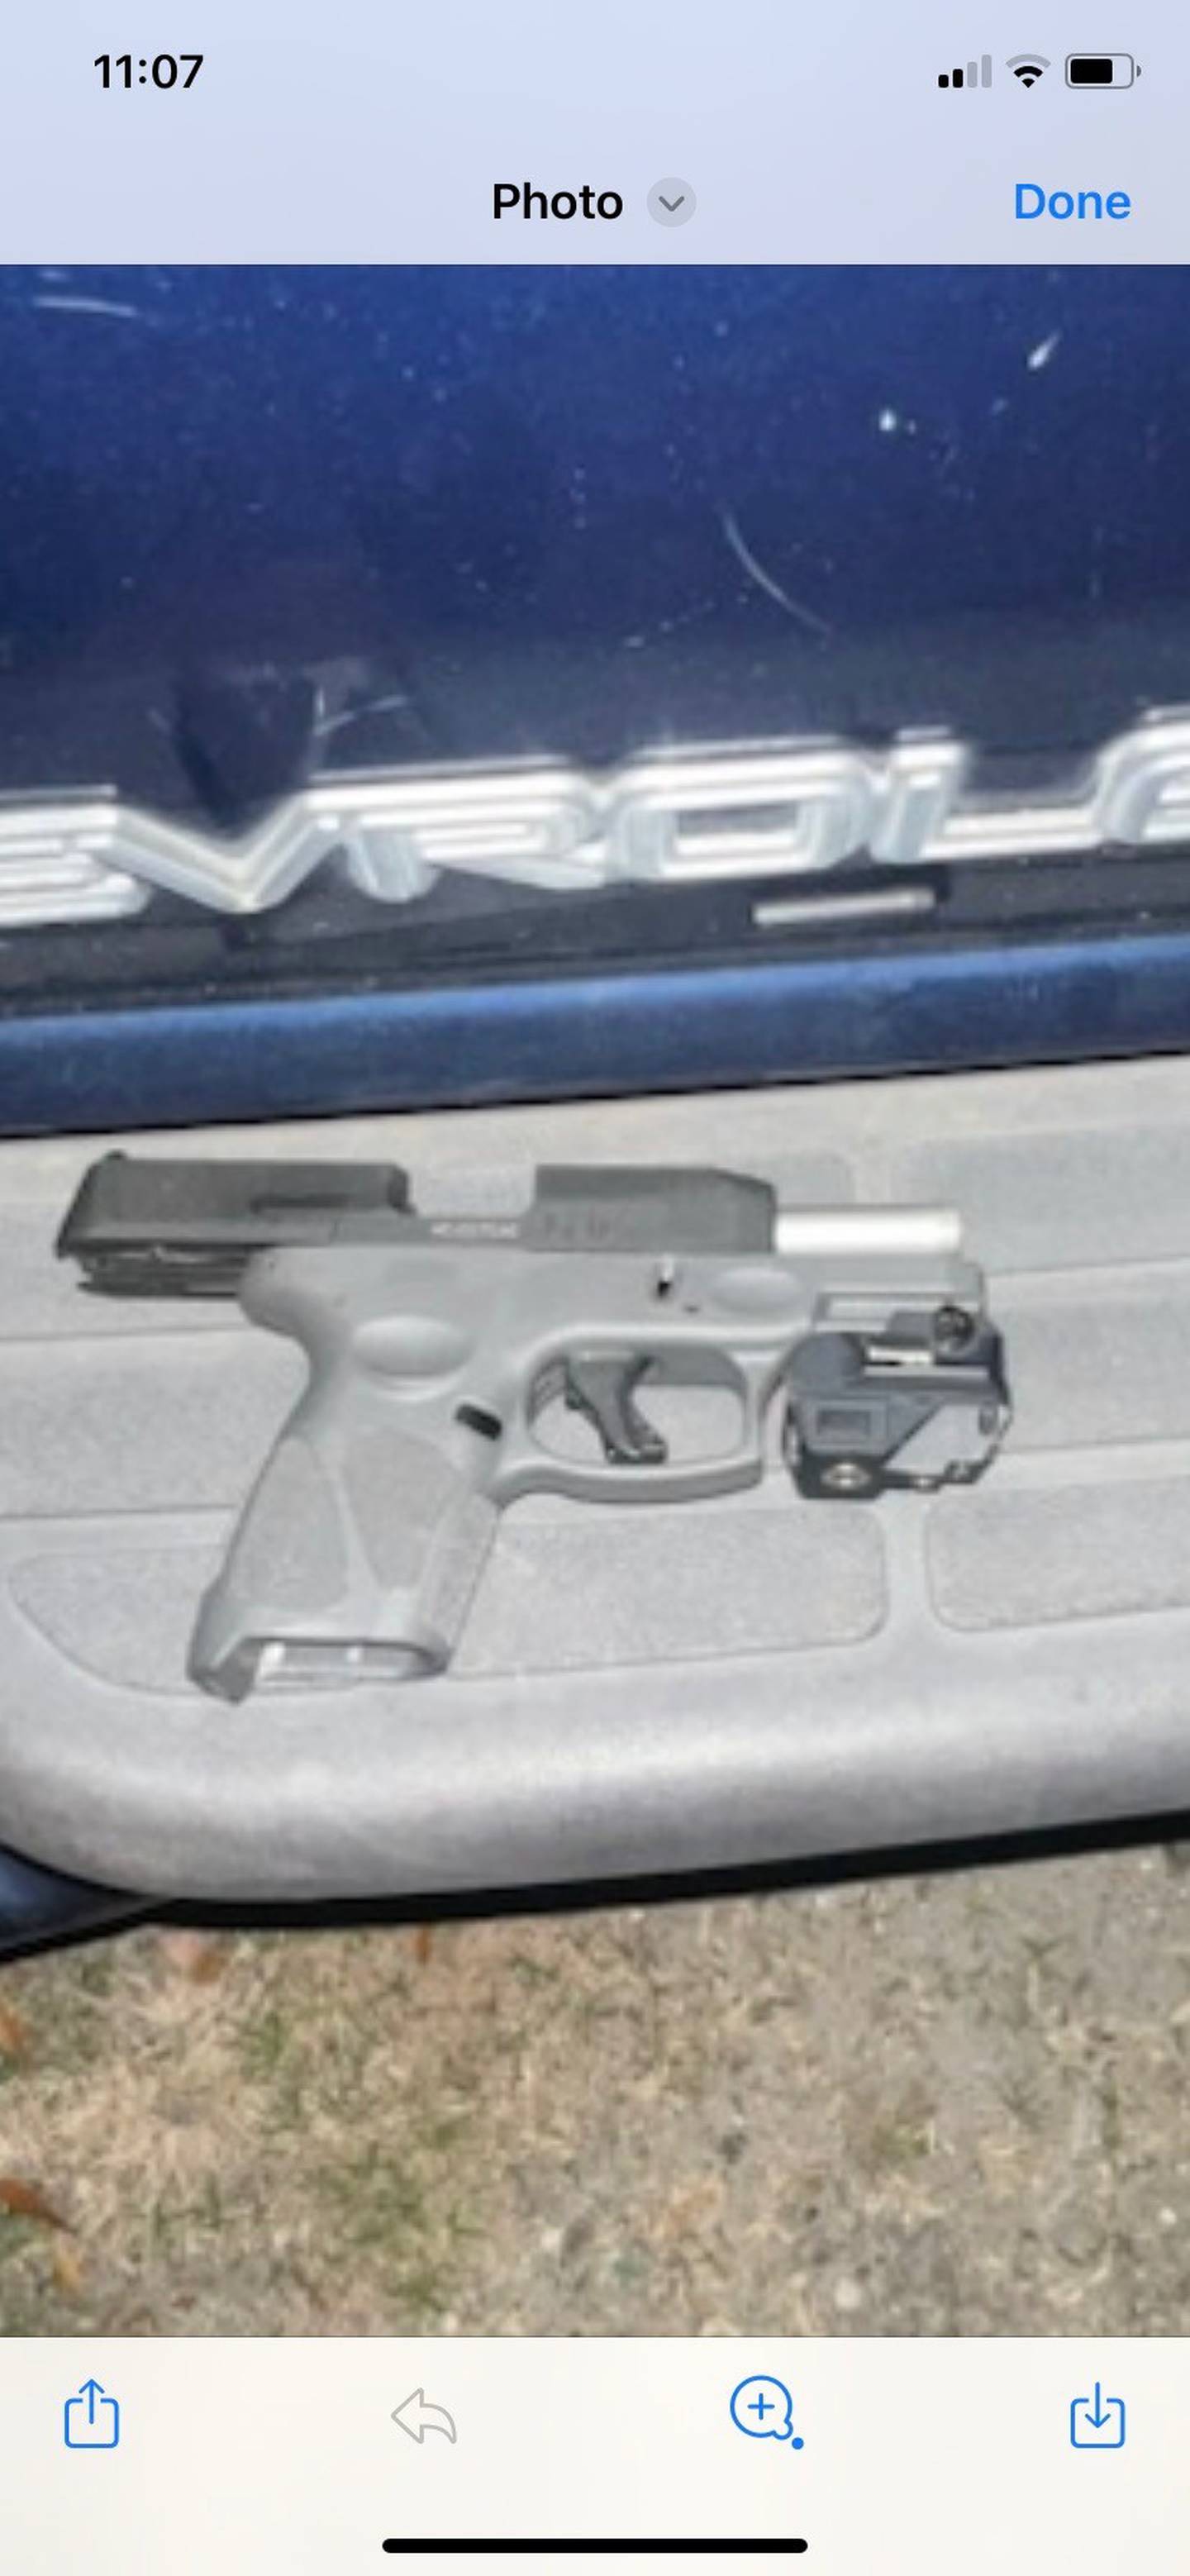 Second firearm located at the scene of Jacksonville officer-involved shooting